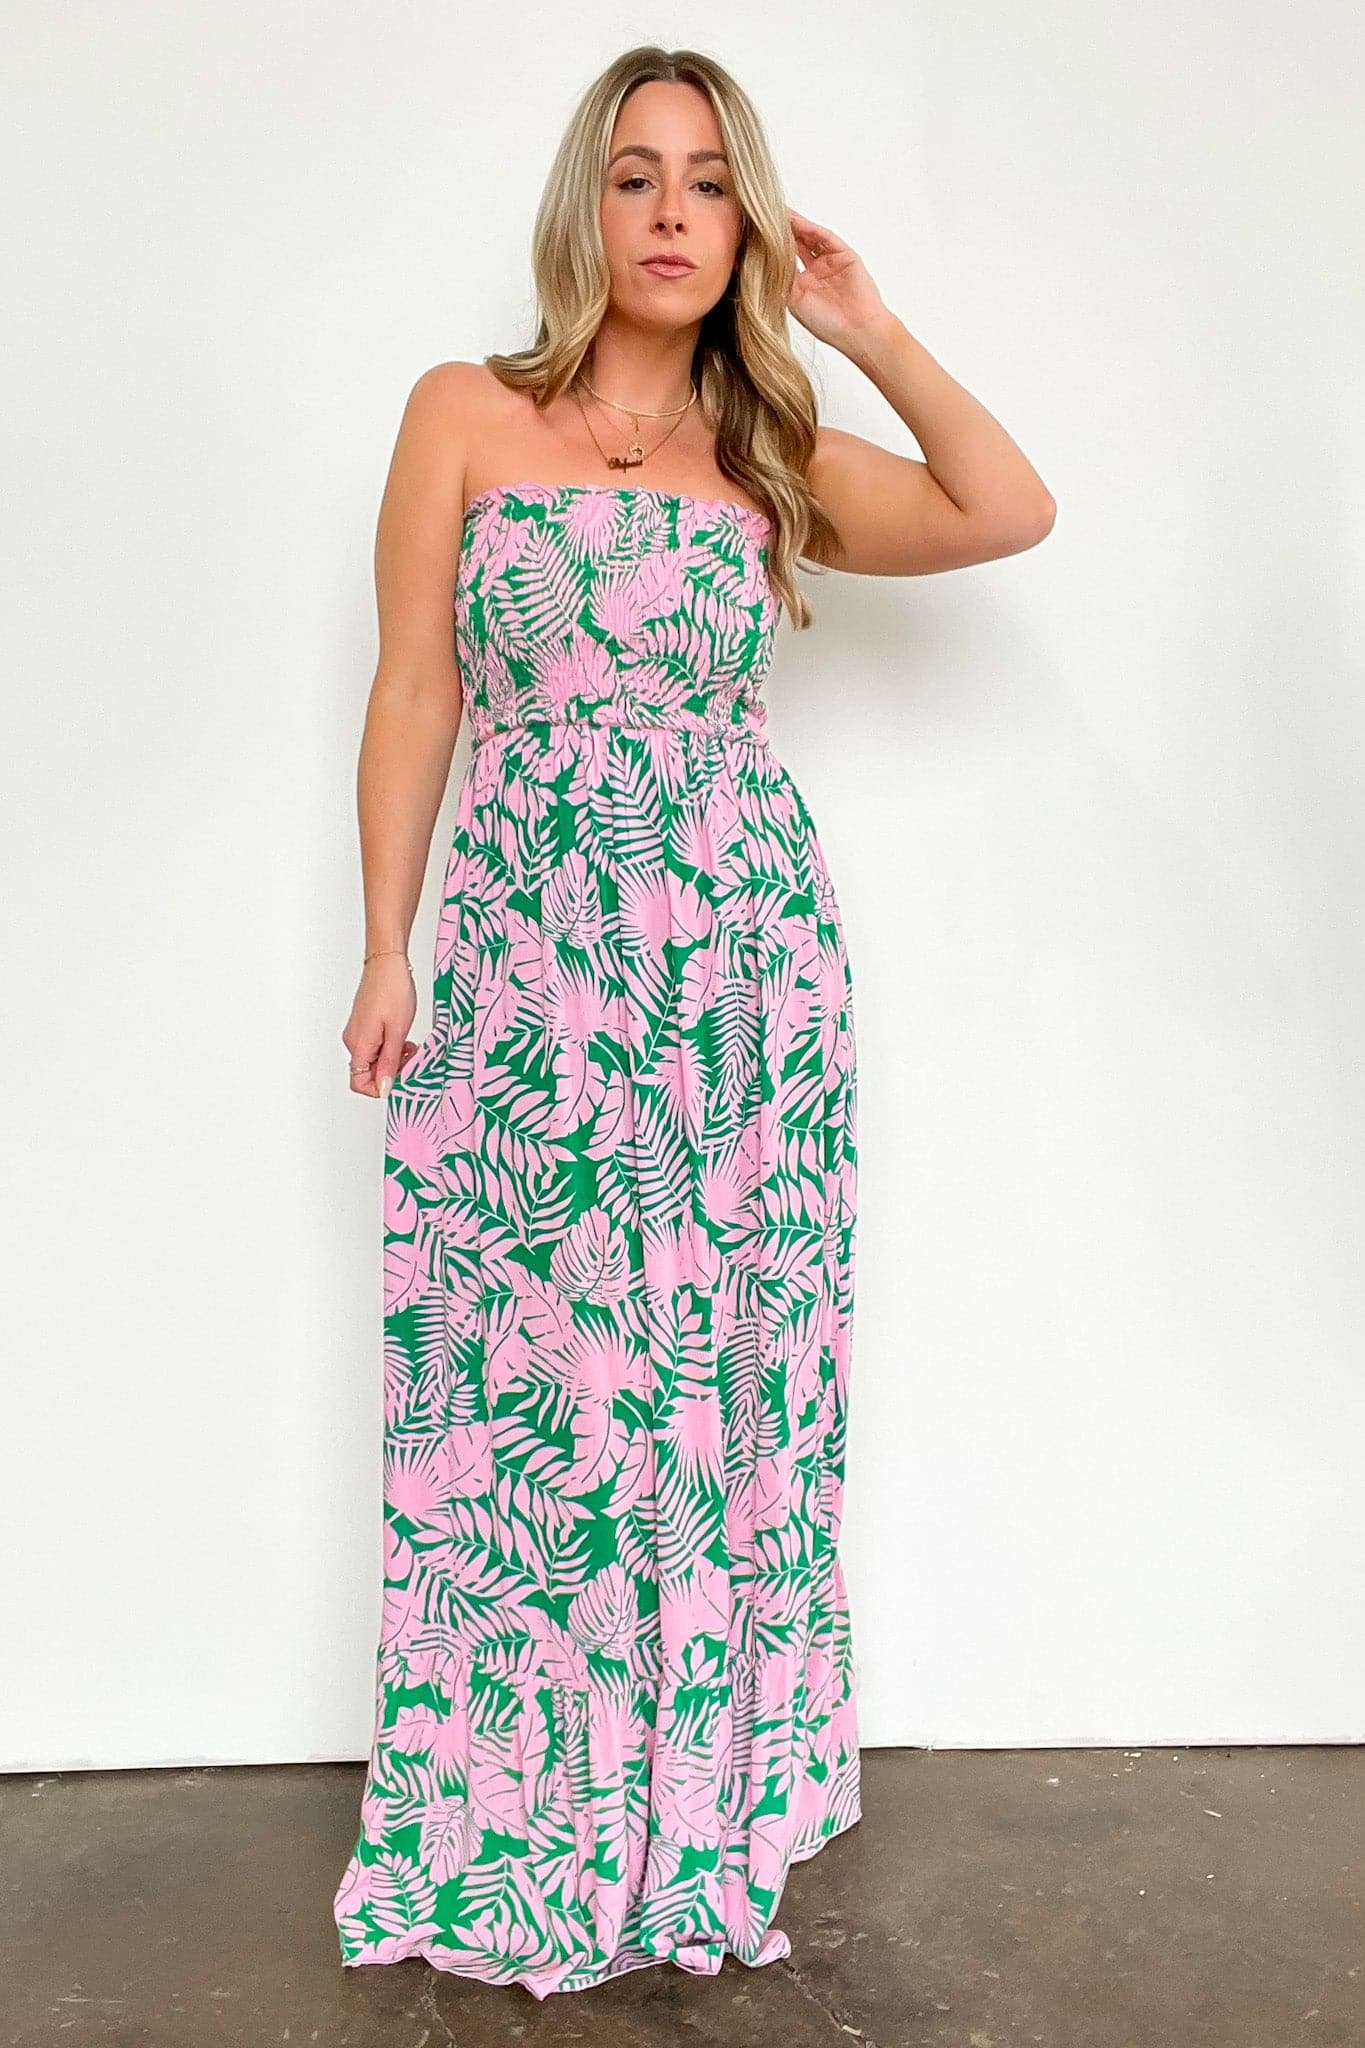  Still in Paradise Tropical Print Smocked Maxi Dress - FINAL SALE - Madison and Mallory